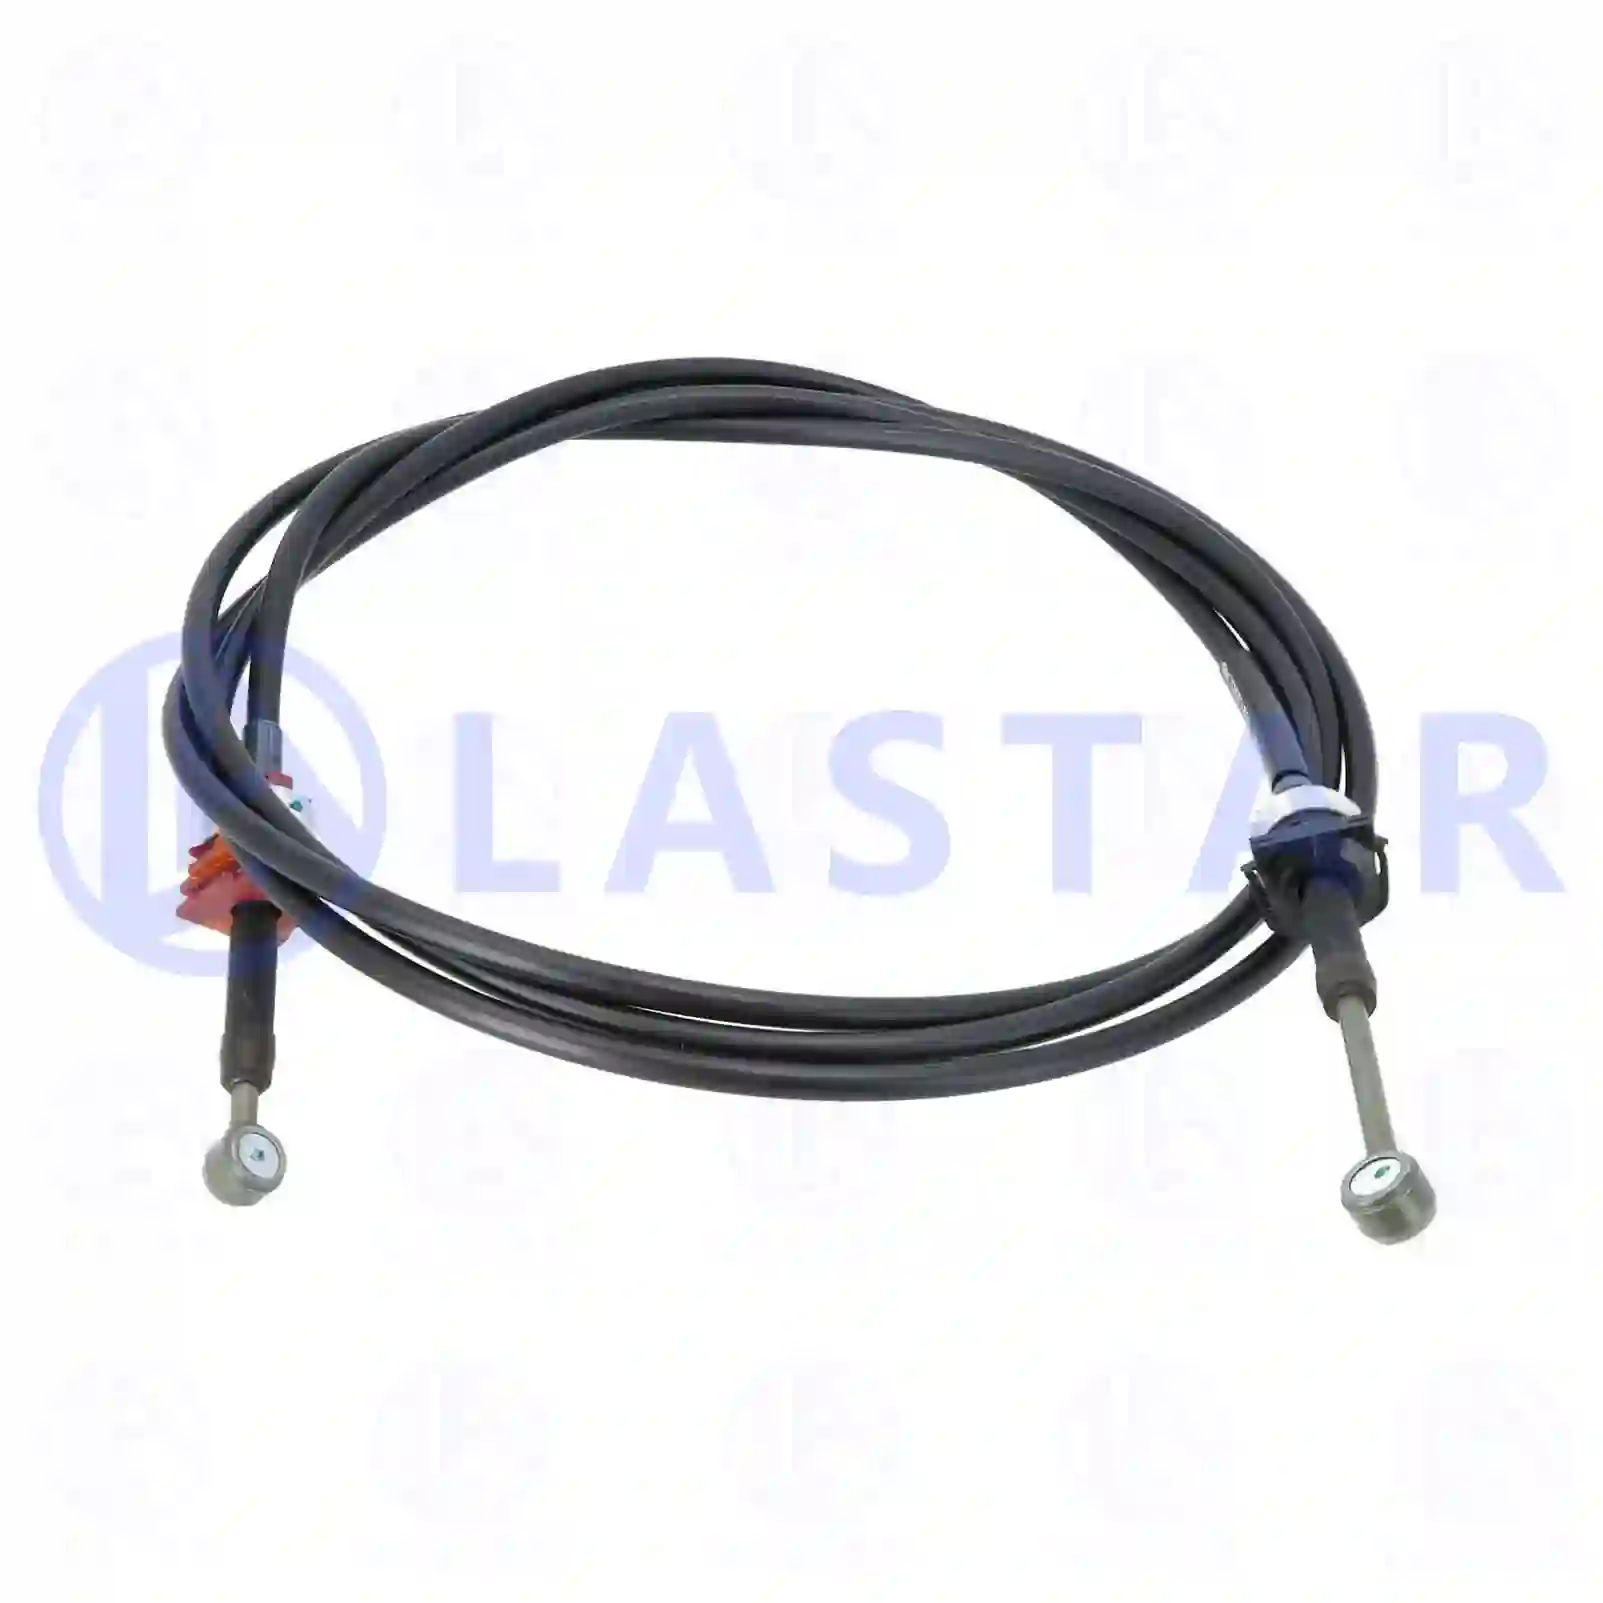 Control cable, switching, 77732441, 20545984, 20700984, 21002884, 21789712, ZG21349-0008 ||  77732441 Lastar Spare Part | Truck Spare Parts, Auotomotive Spare Parts Control cable, switching, 77732441, 20545984, 20700984, 21002884, 21789712, ZG21349-0008 ||  77732441 Lastar Spare Part | Truck Spare Parts, Auotomotive Spare Parts